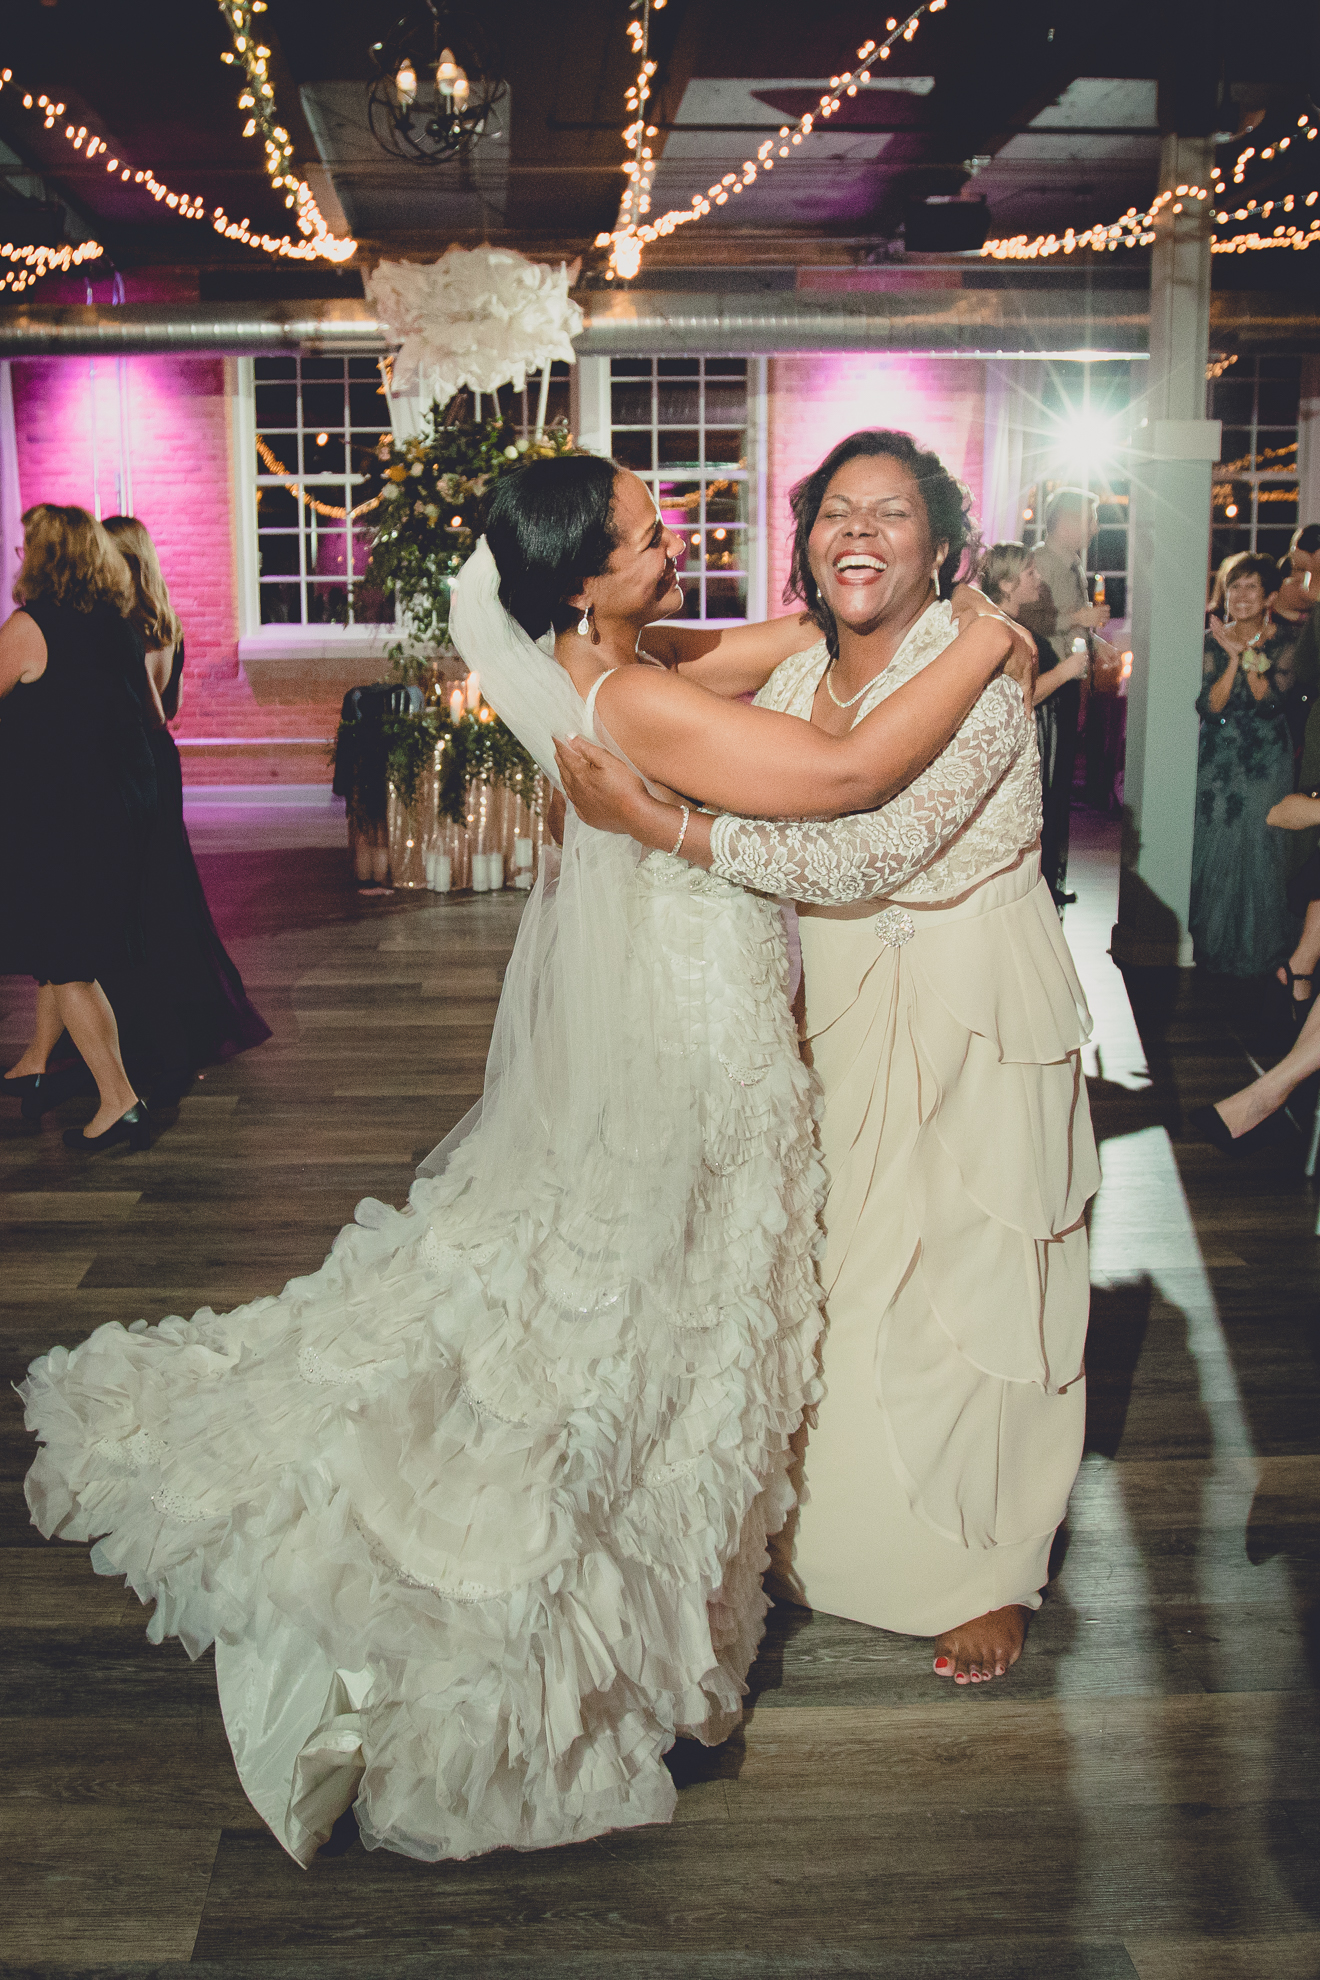 bride and mom dance at wedding reception at the Foundry in Buffalo, NY